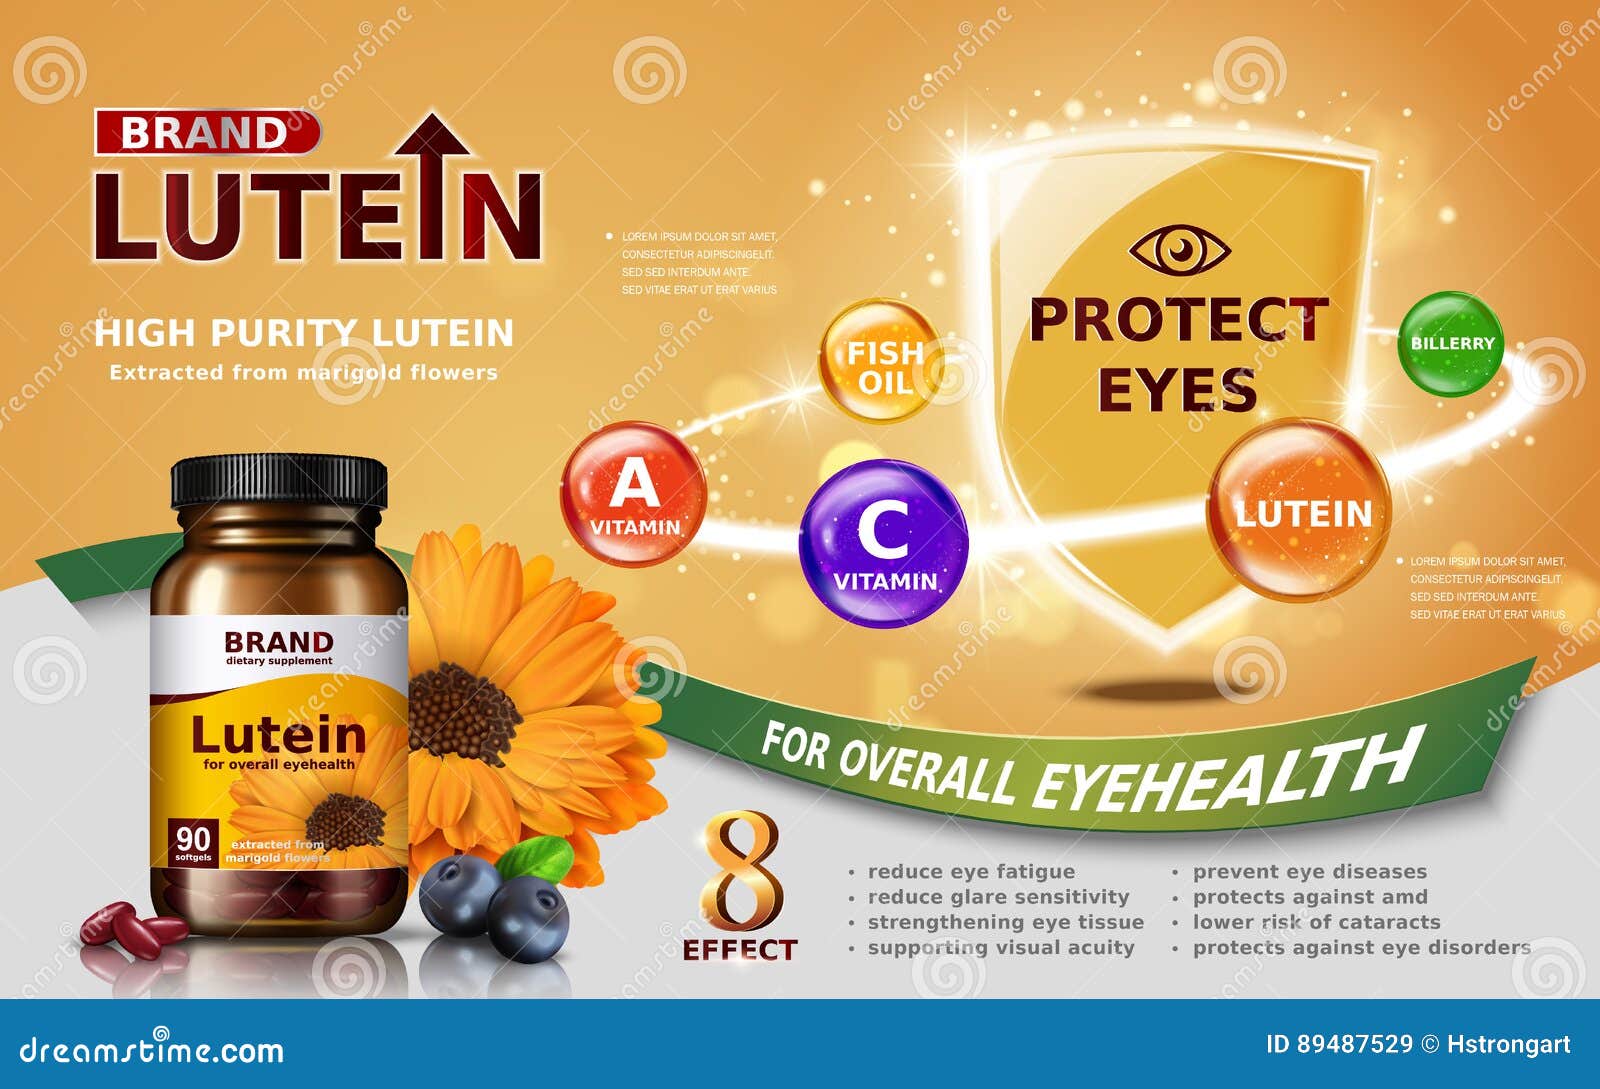 high purity lutein ad